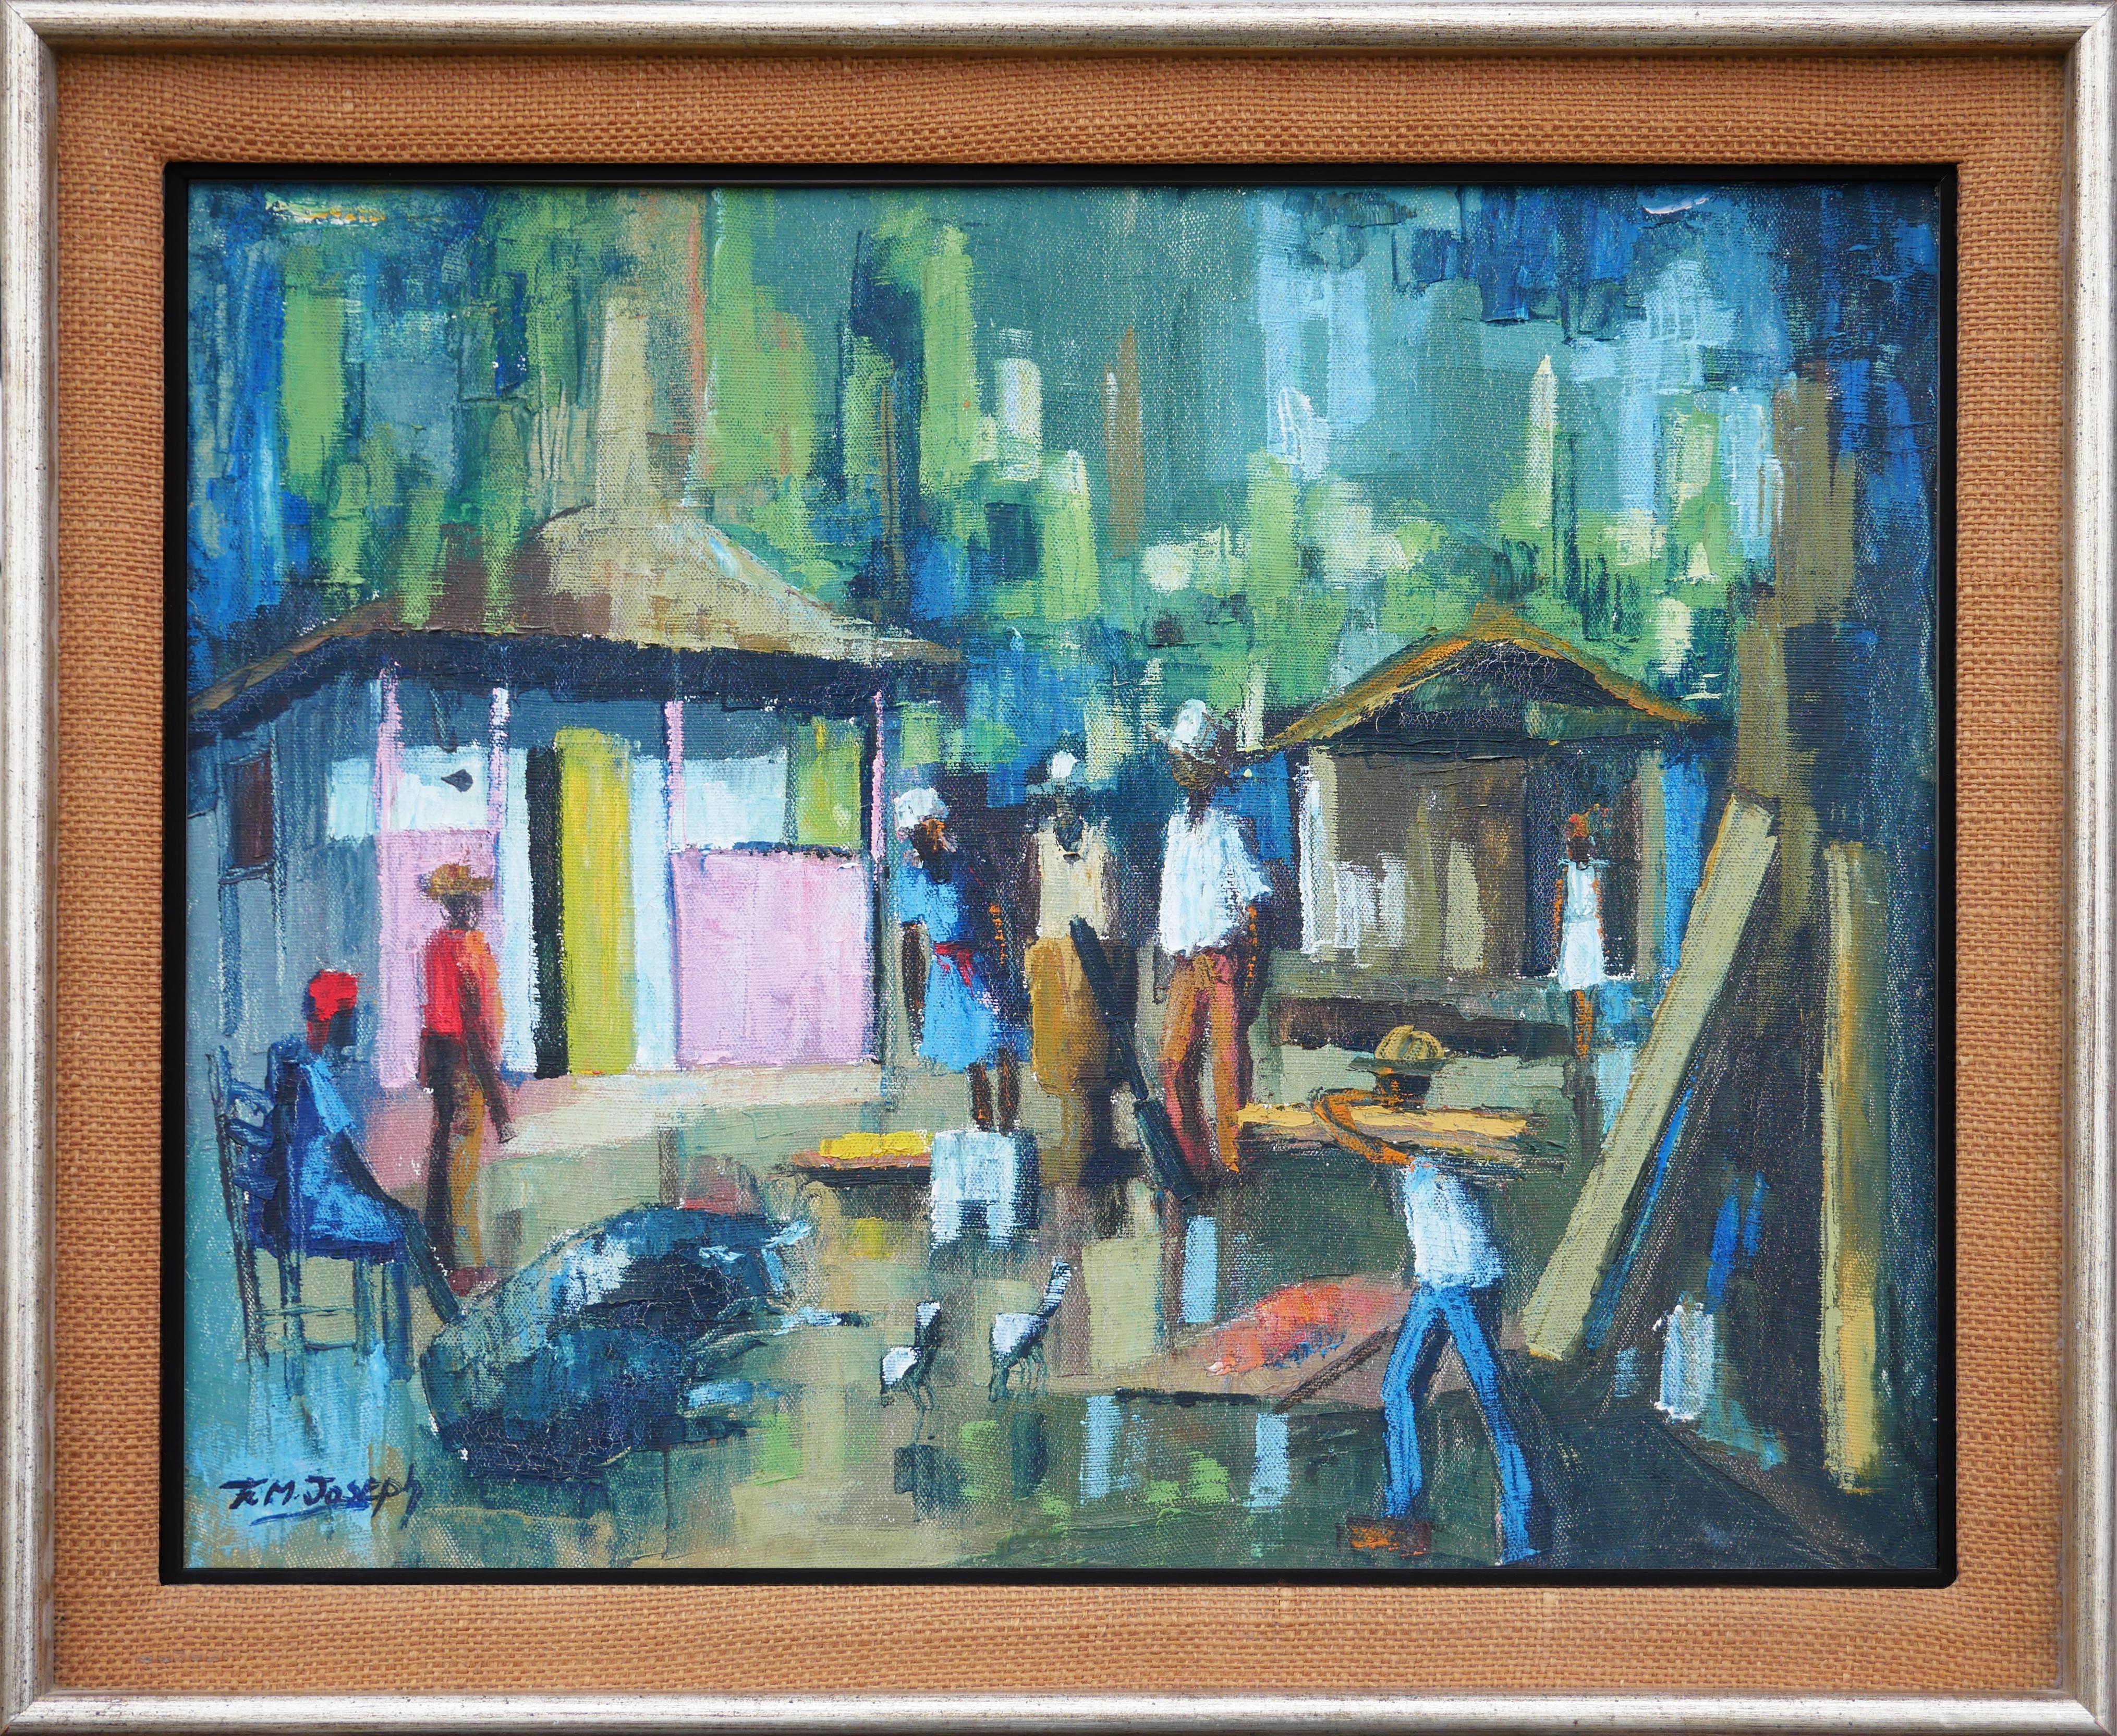 Franklin M. Joseph Abstract Painting - Post Impressionist Inspired Modern Blue & Green Abstract Village Landscape Scene